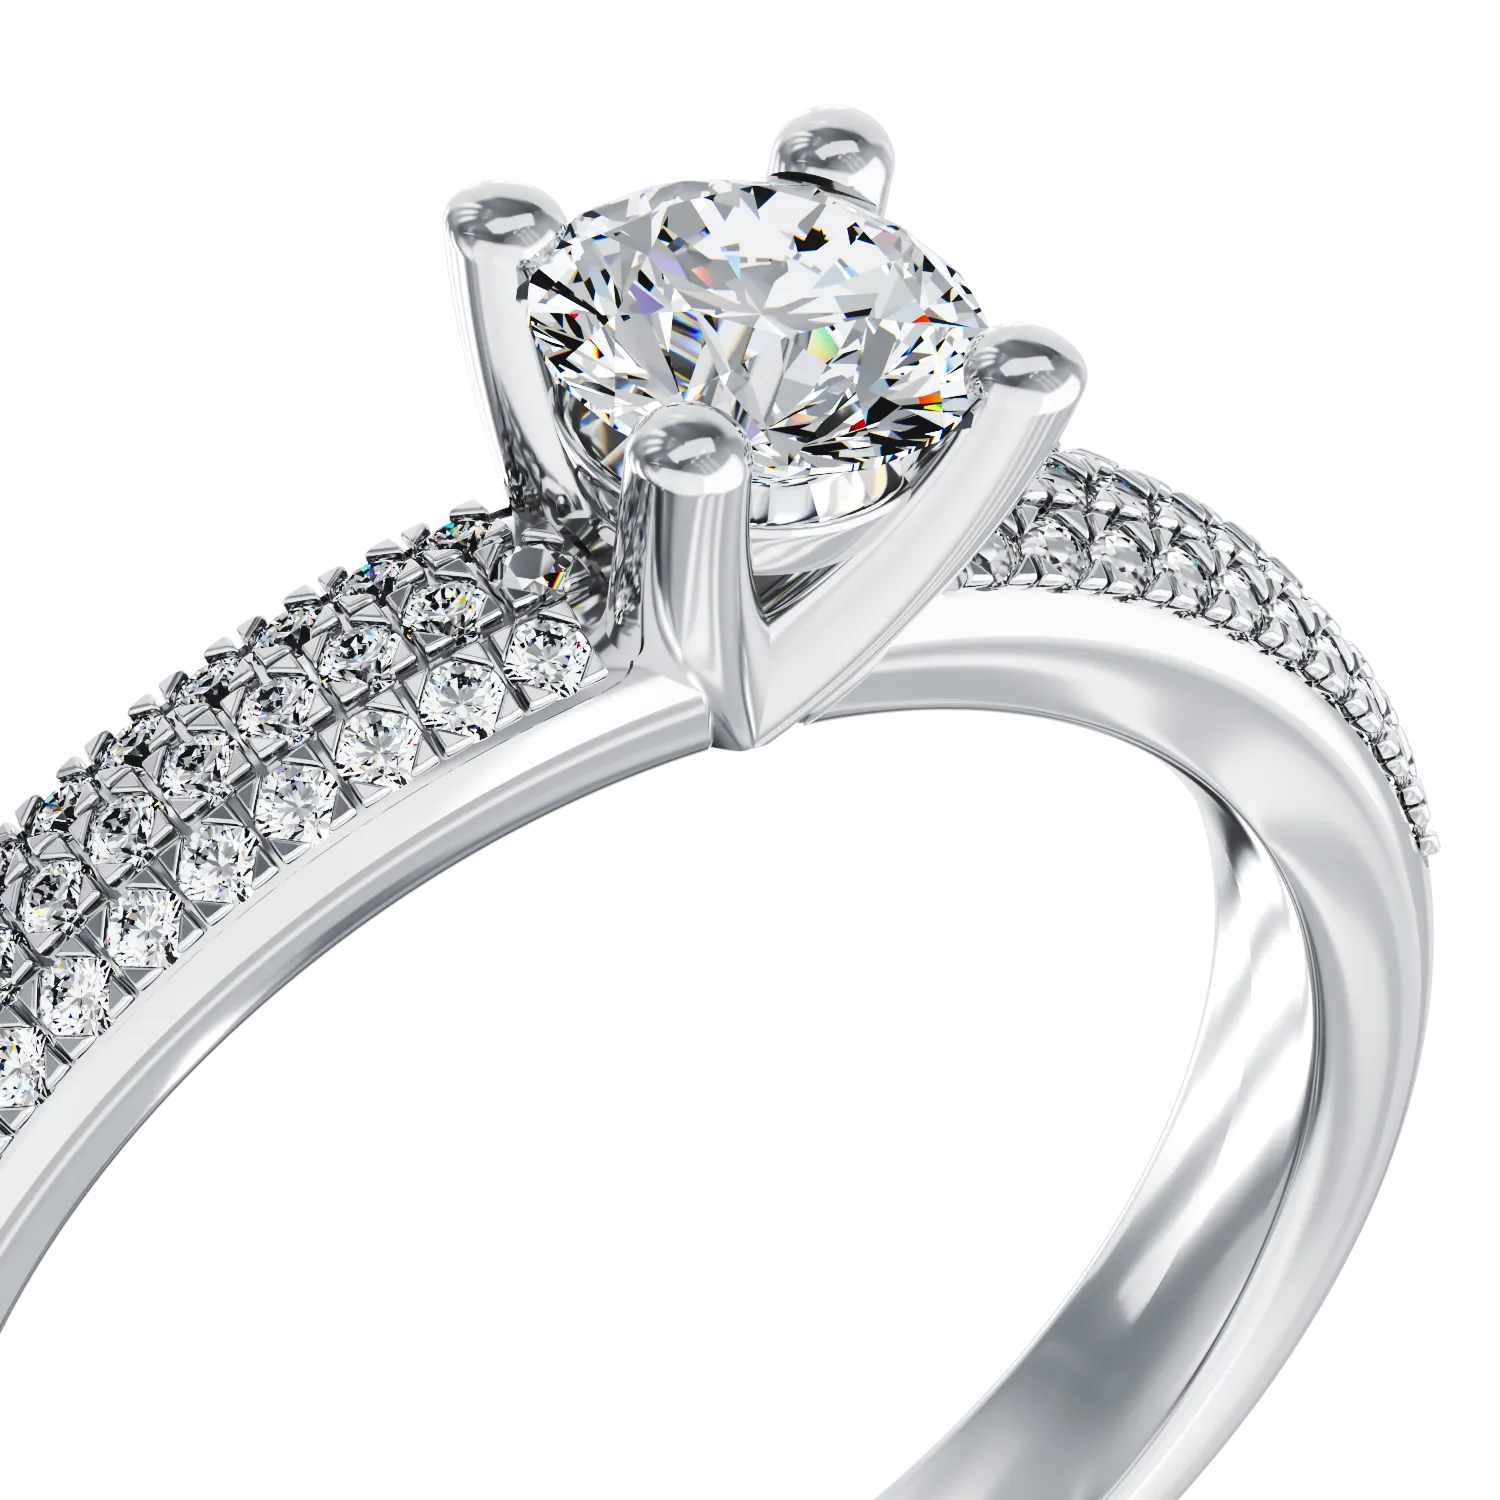 18K white gold engagement ring with 0.3ct diamond and 0.27ct diamonds